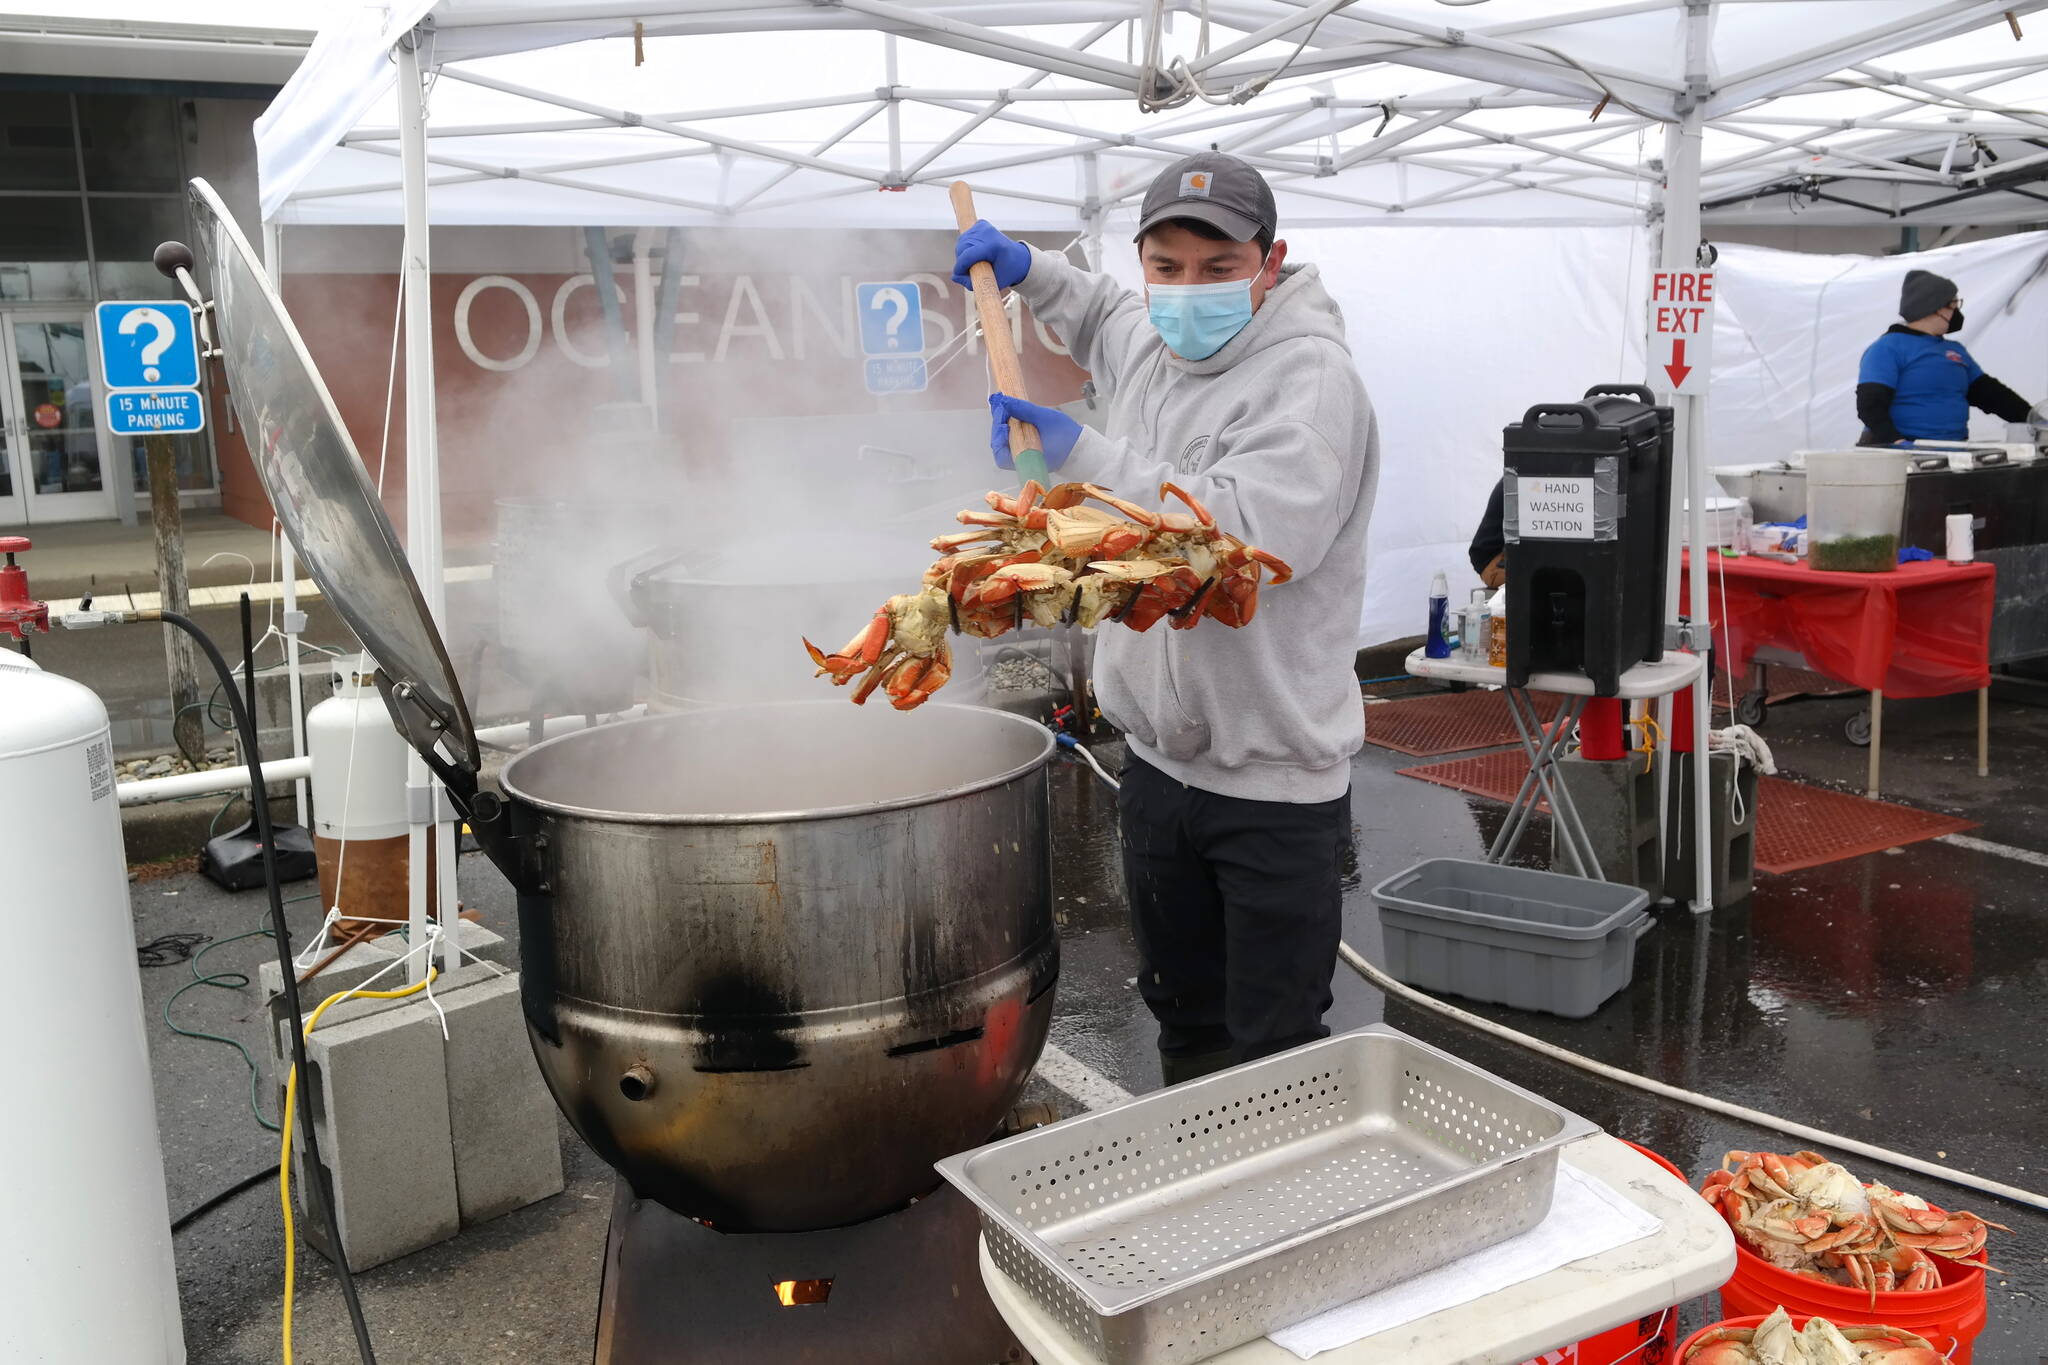 Josh Debruler of Dungeness Crab and Seafood Festival prepares a sold-out crab dinner on Sunday, March 20. This was the first year the Port Angeles-based team paired up with the Razor Clam Festival to expand seafood offerings at the annual event in Ocean Shores. Erika Gebhardt I The Daily World